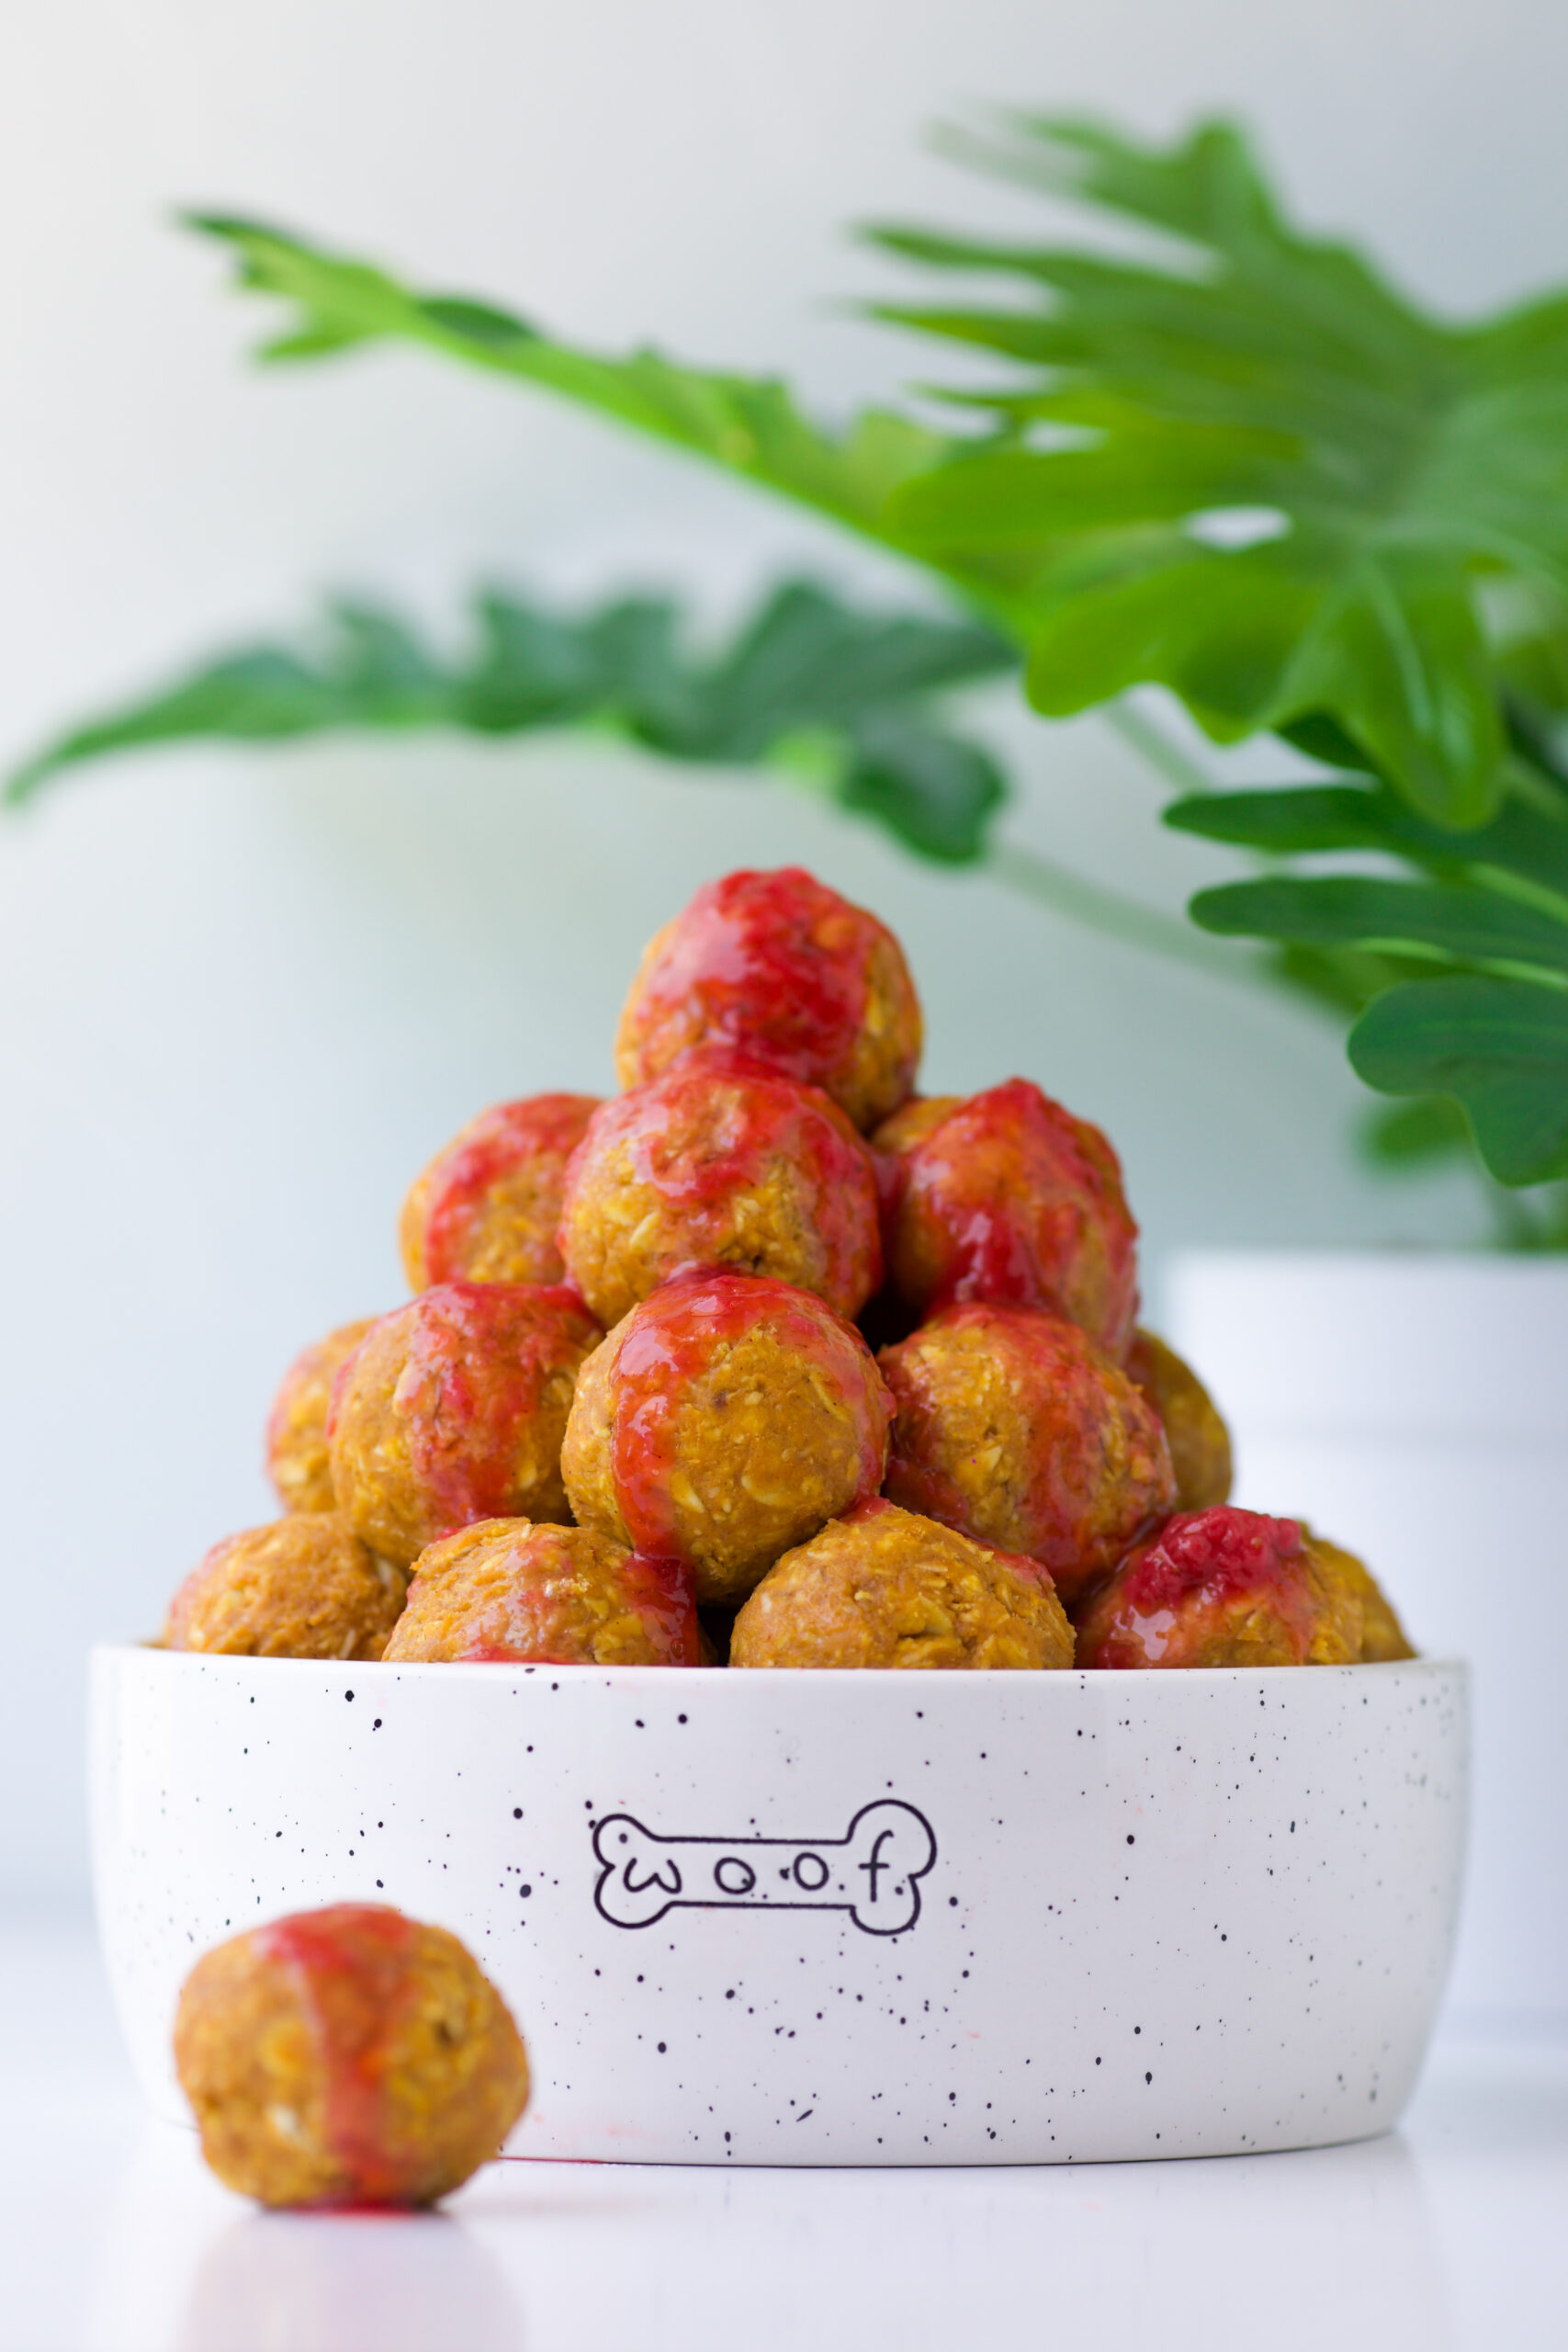 dog treats that look like meatballs with strawberry sauce.